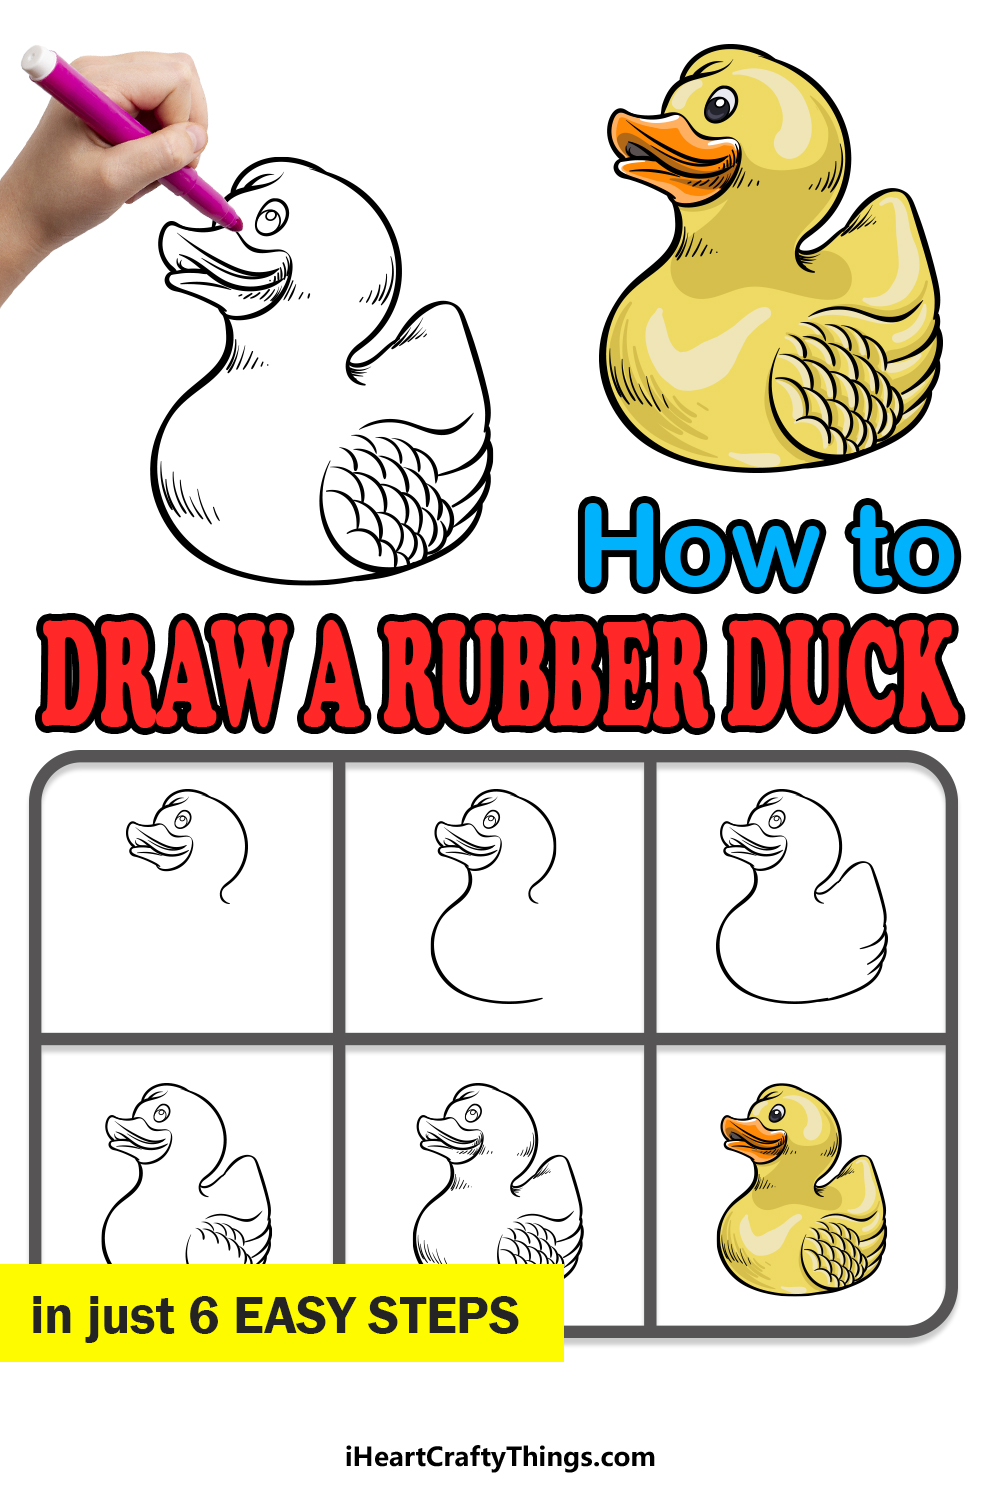 how to draw a Rubber Duck in 6 easy steps